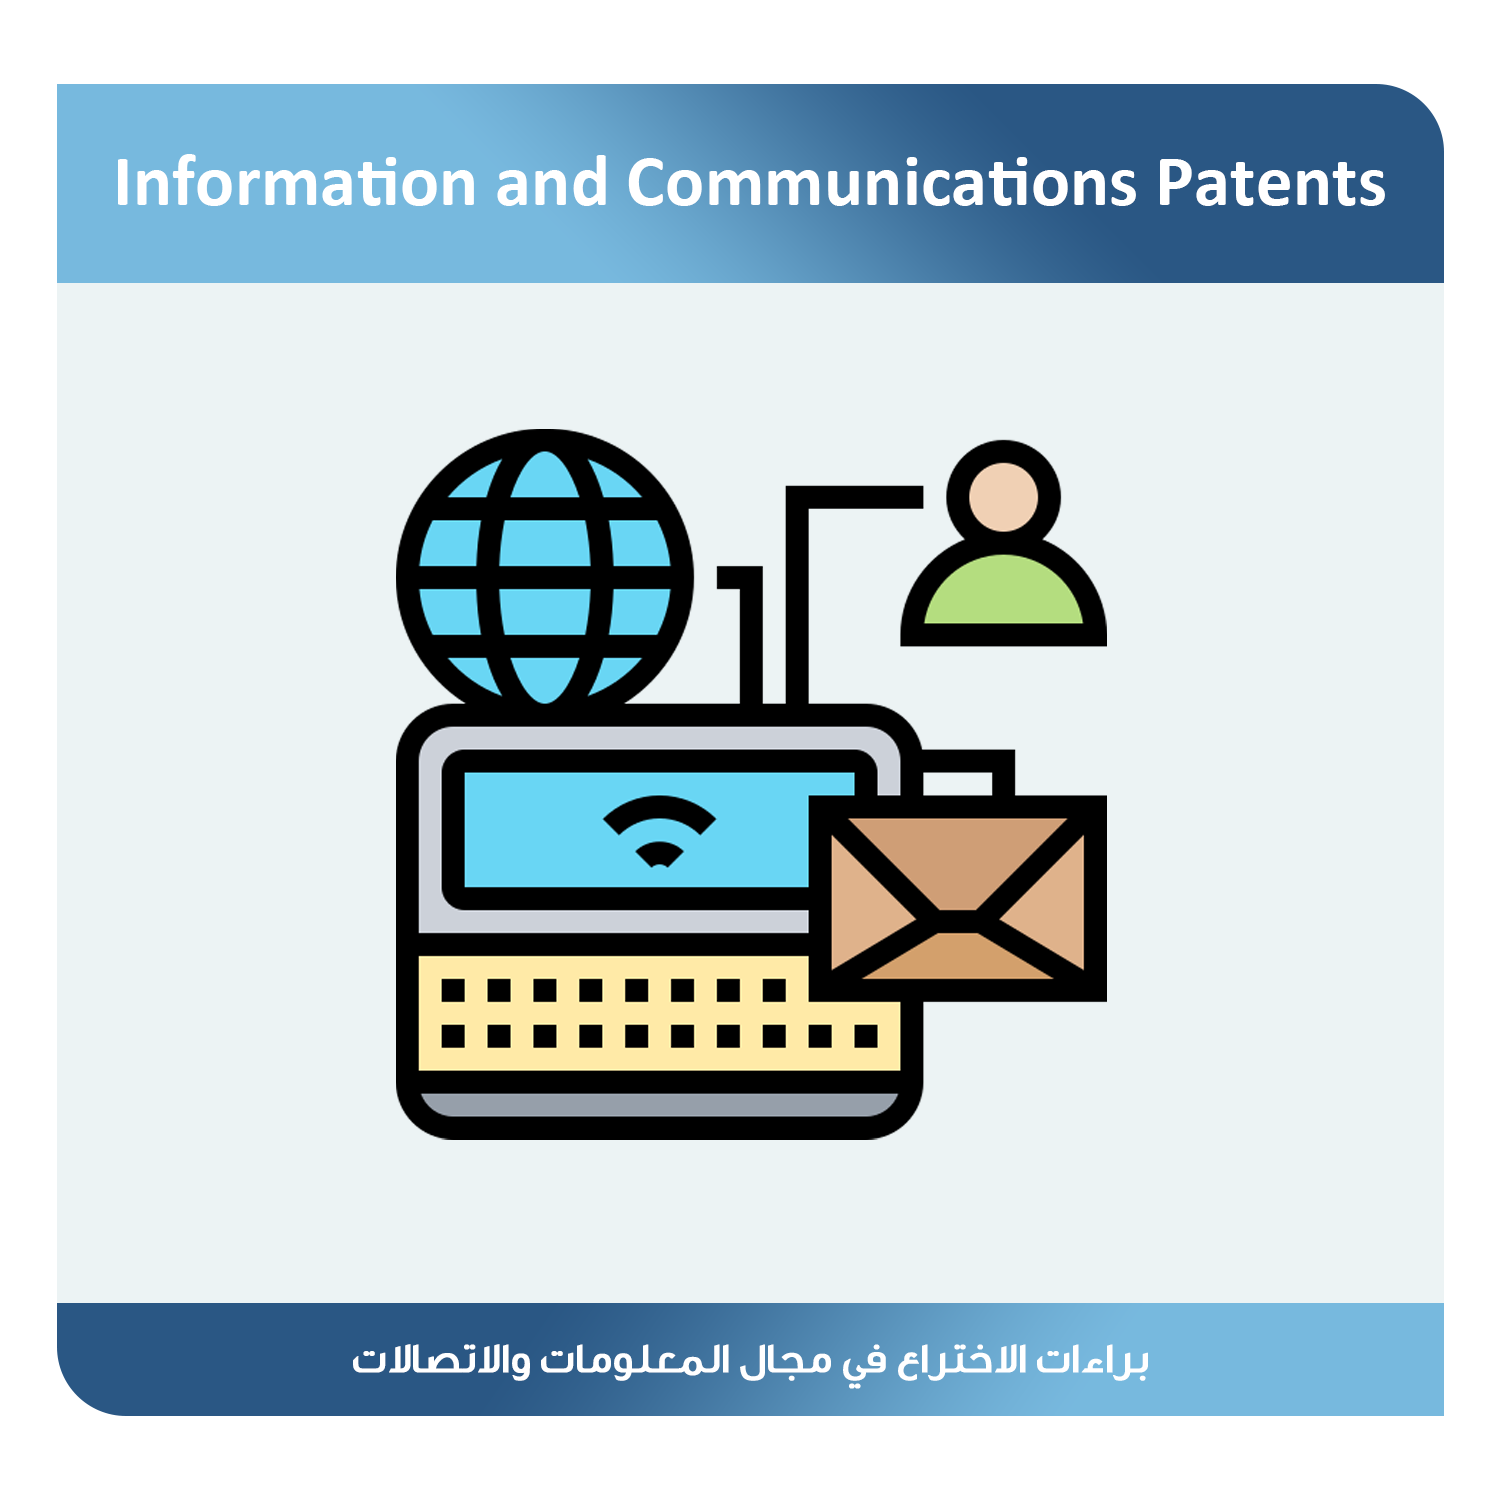 Information and Communications Patents